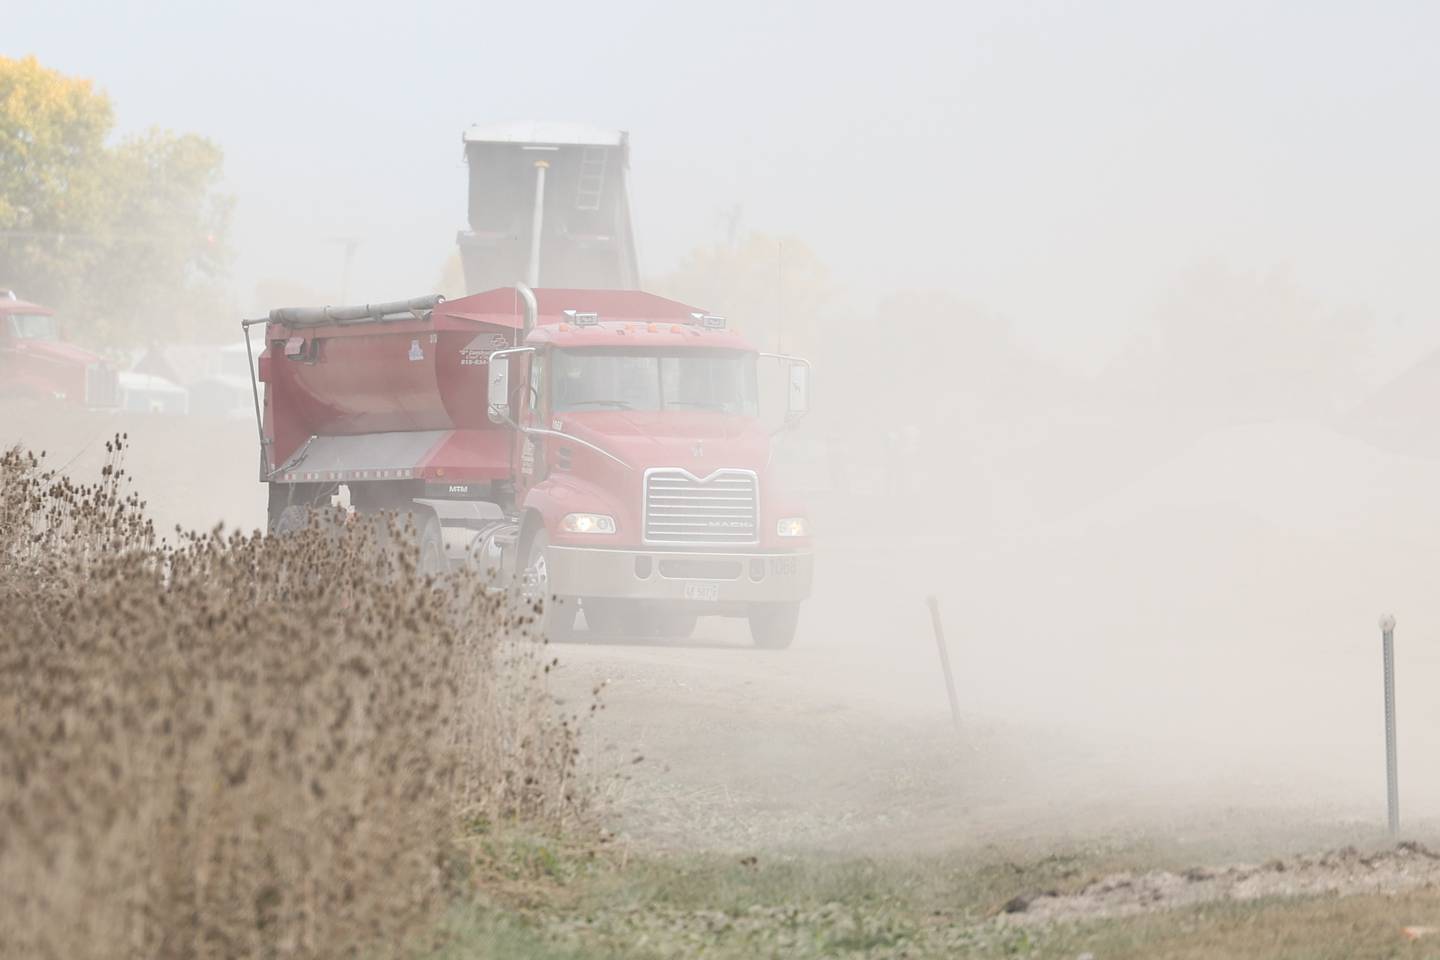 Trucks kick up dust along SE I-55 Frontage Road as groundwork continues on the Rock Run Crossings Development near the I-55 and I-80 interchange in Joliet on Tuesday, October 11th.